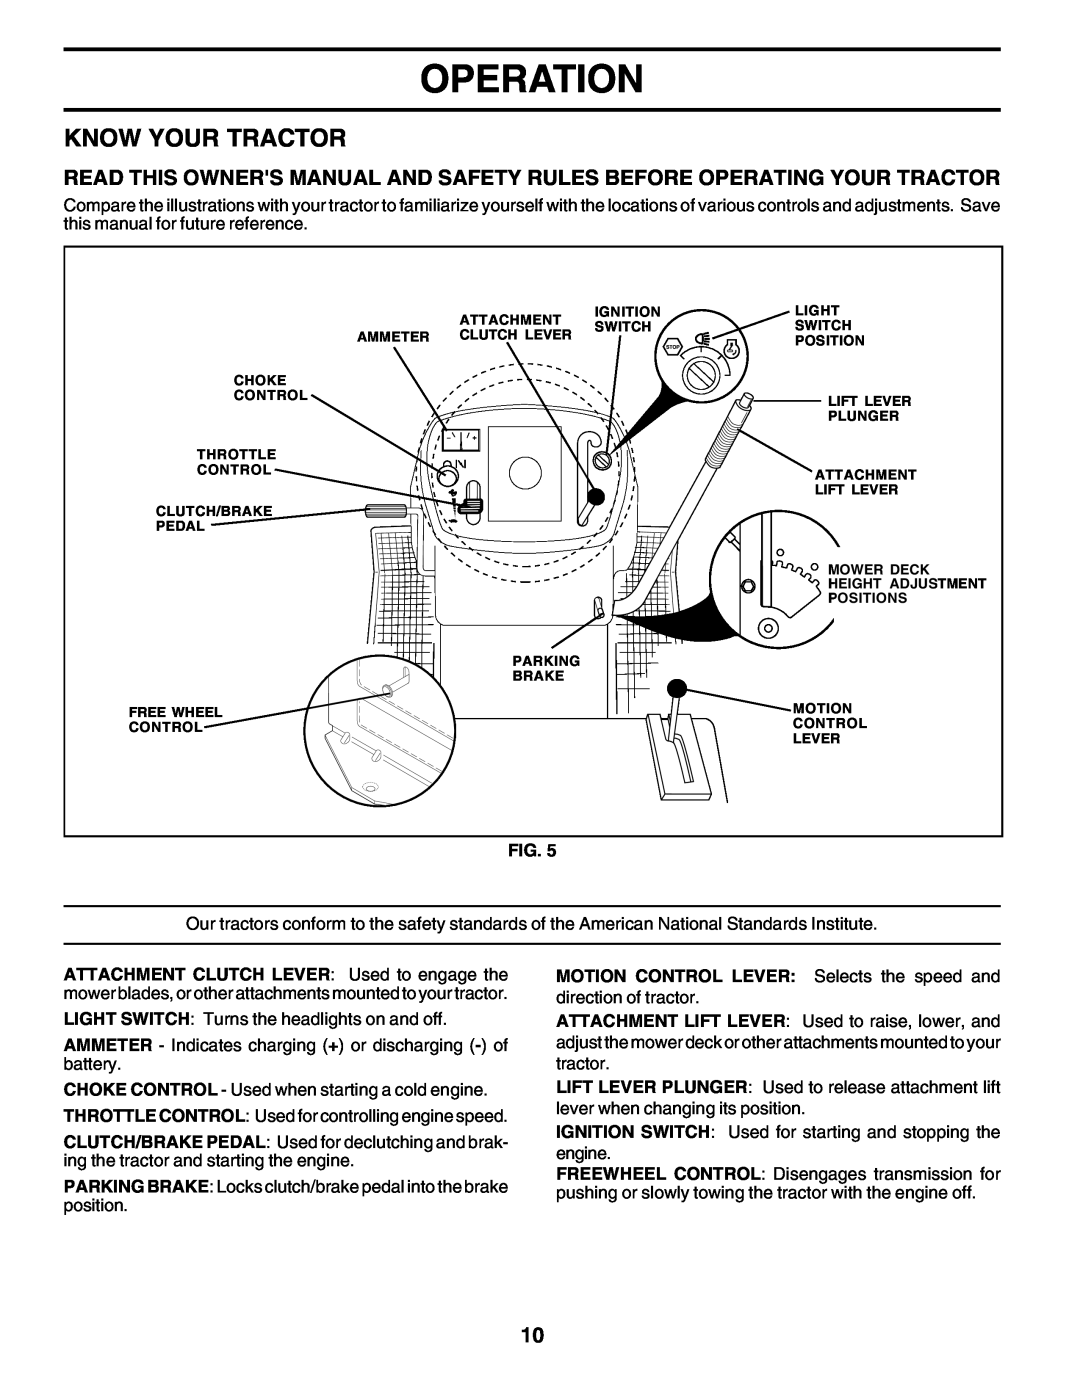 Poulan 180002 owner manual Know Your Tractor, Operation, MOTION CONTROL LEVER Selects the speed and direction of tractor 